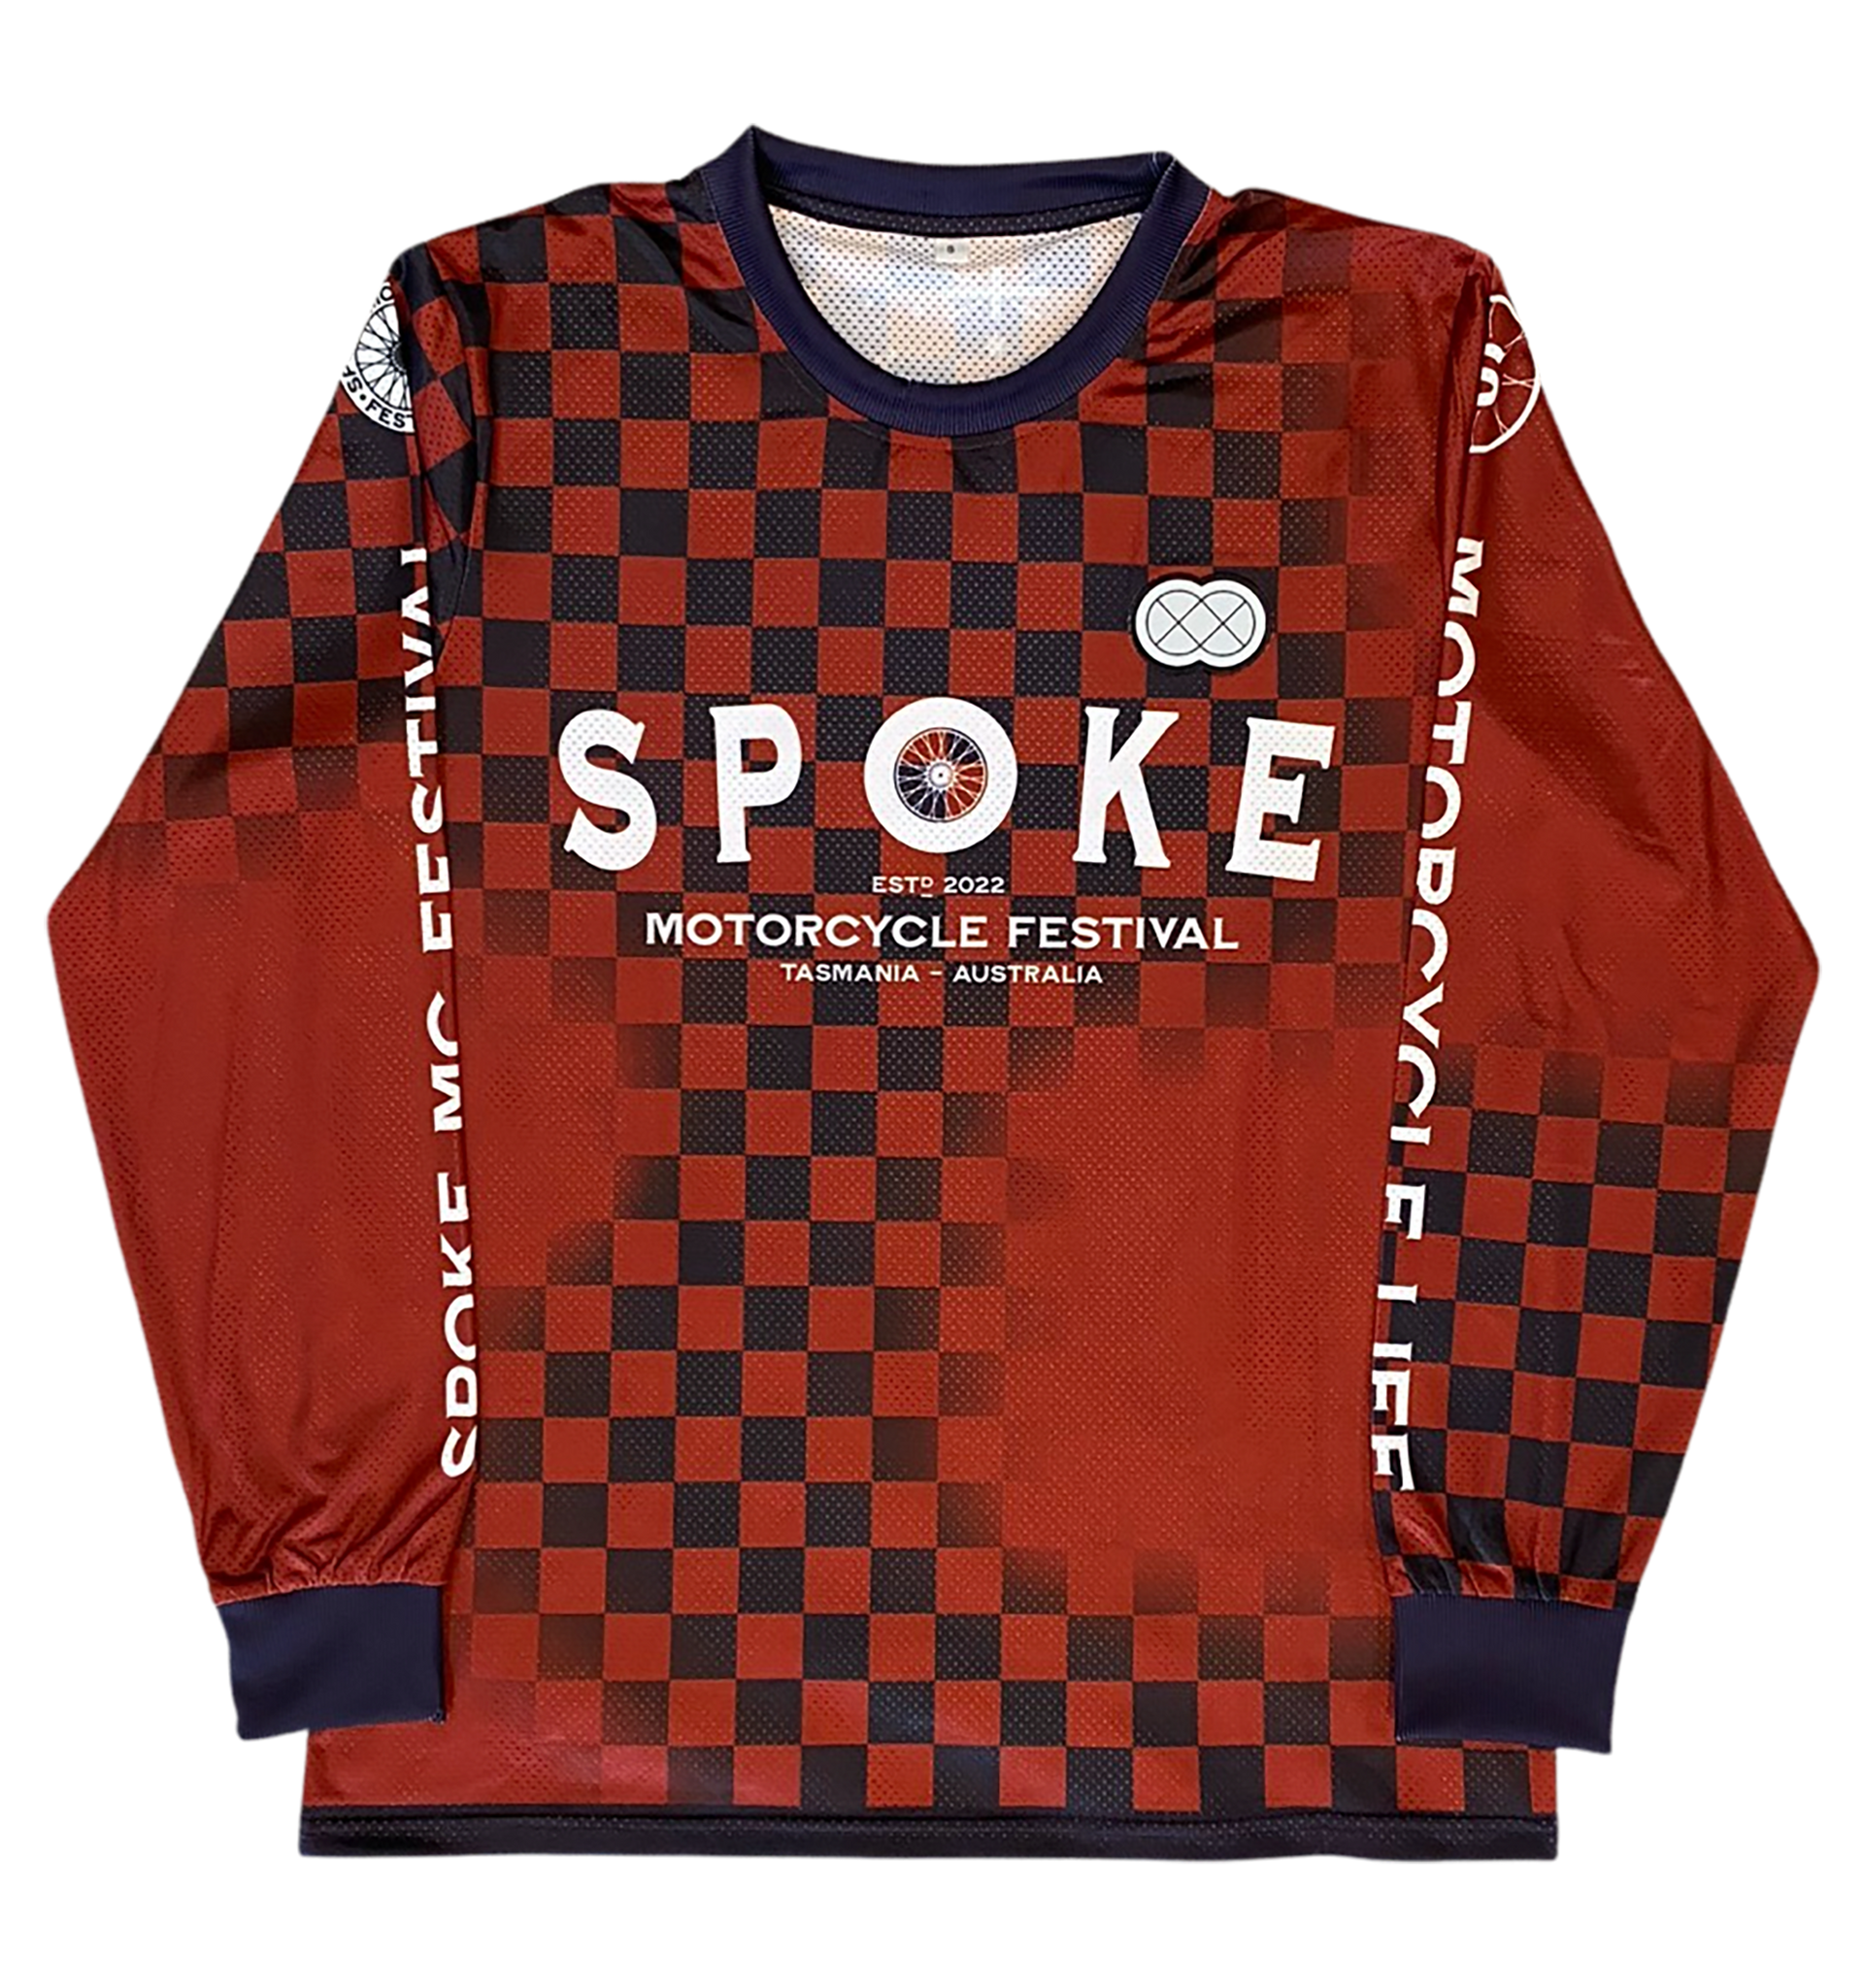 Spoke Race Jersey - Navy and Red Check